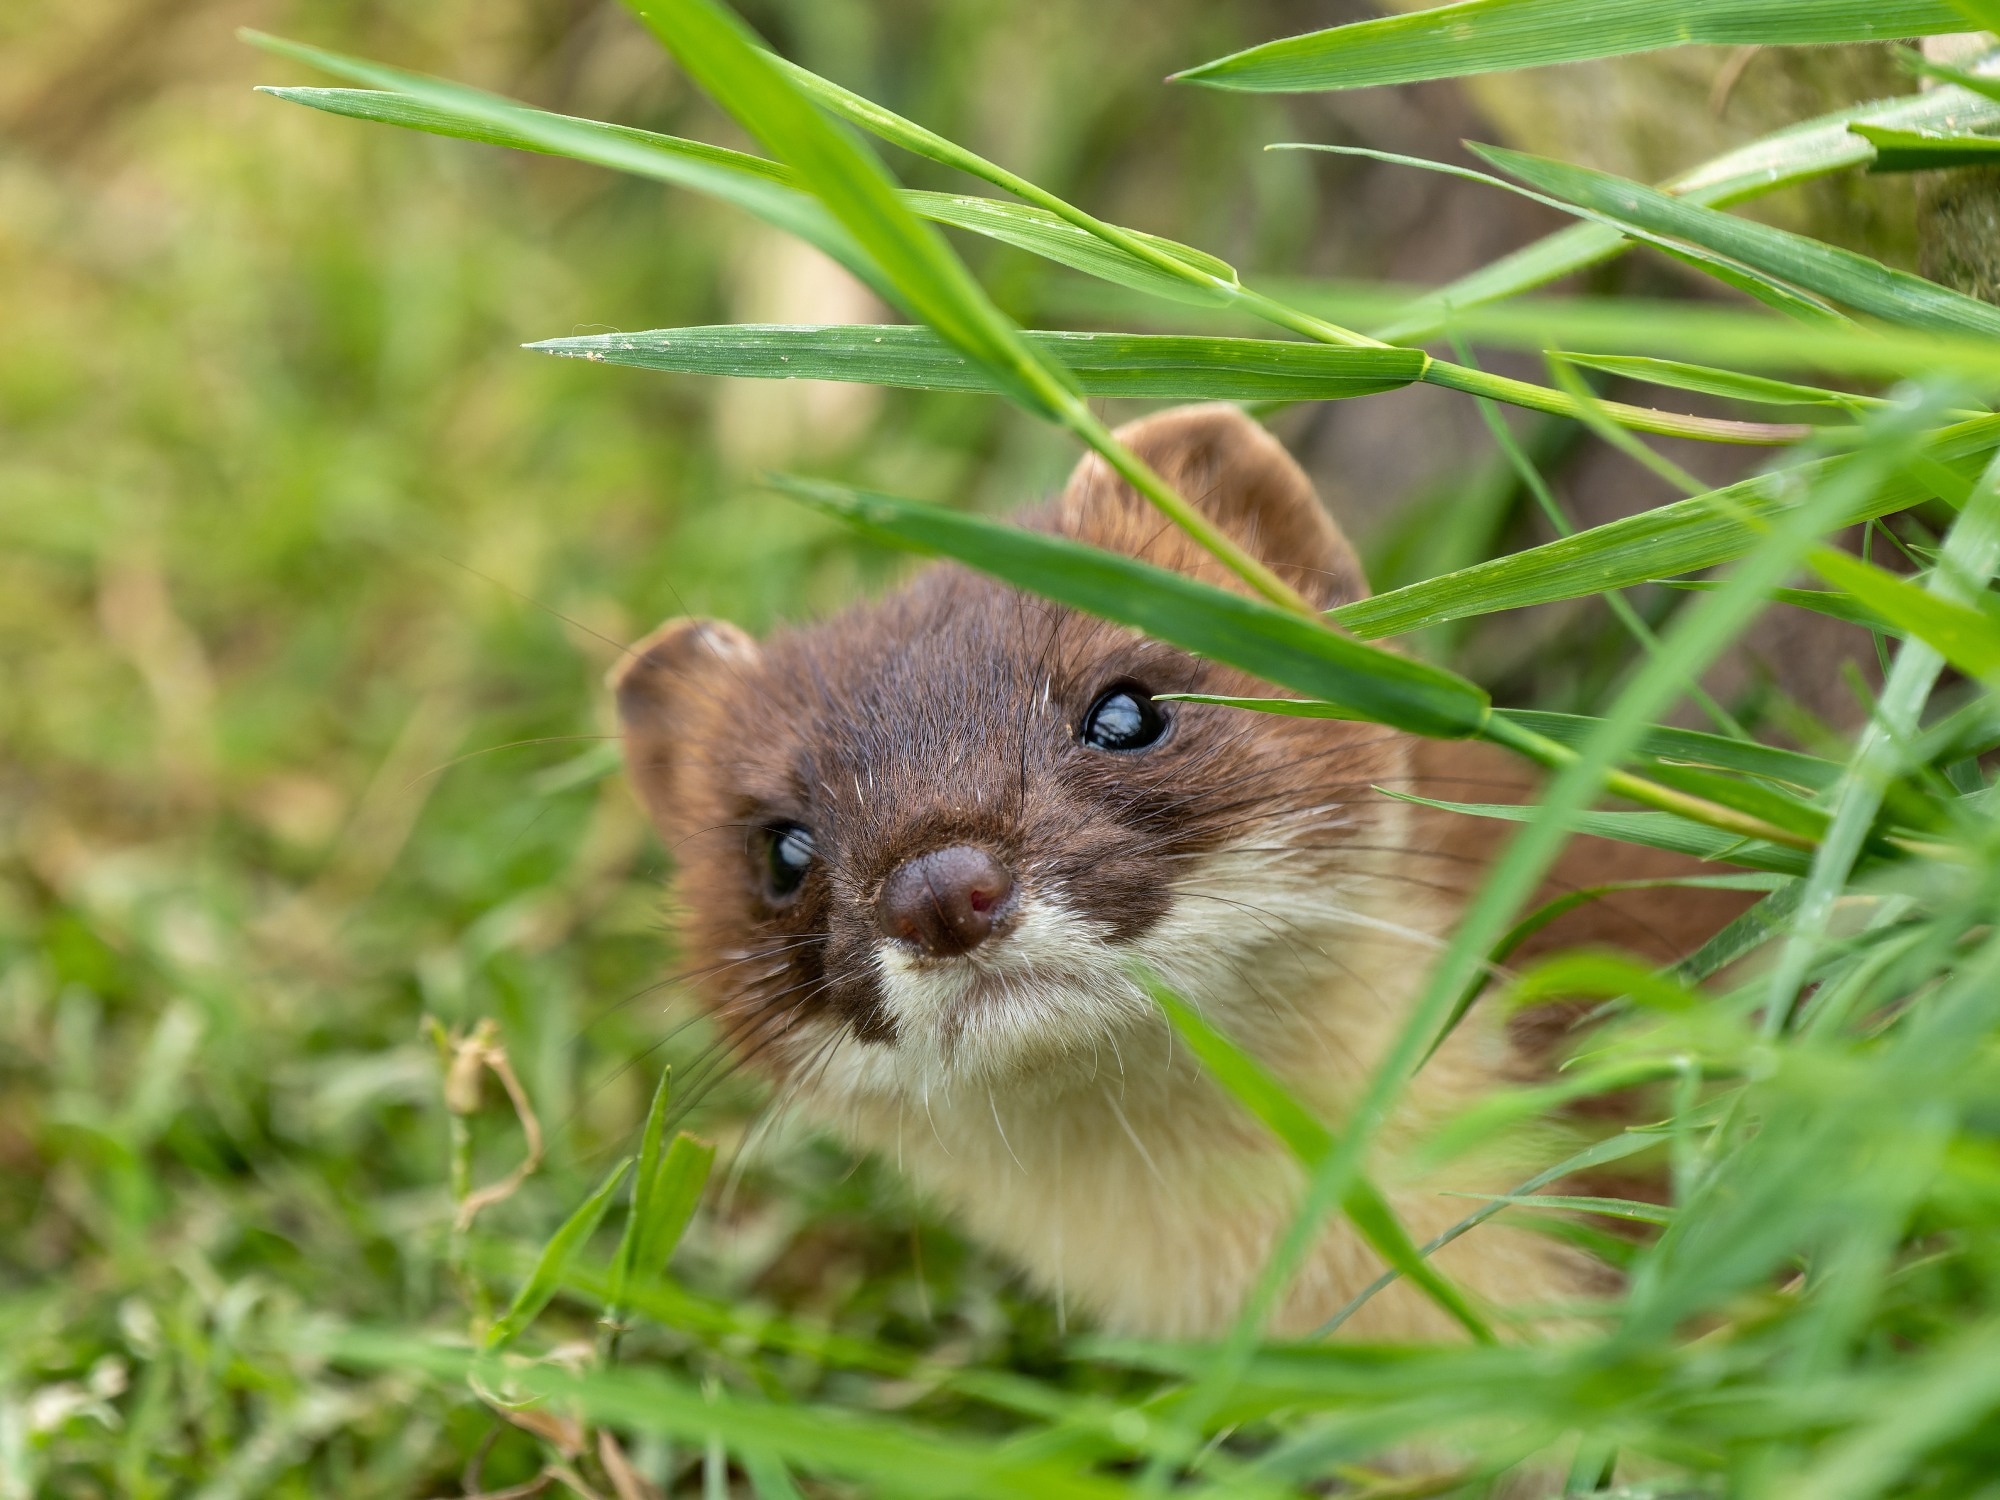 Lack of detection of SARS-CoV-2 in British wildlife 2020-21 and first description of a stoat (Mustela erminea) Minacovirus